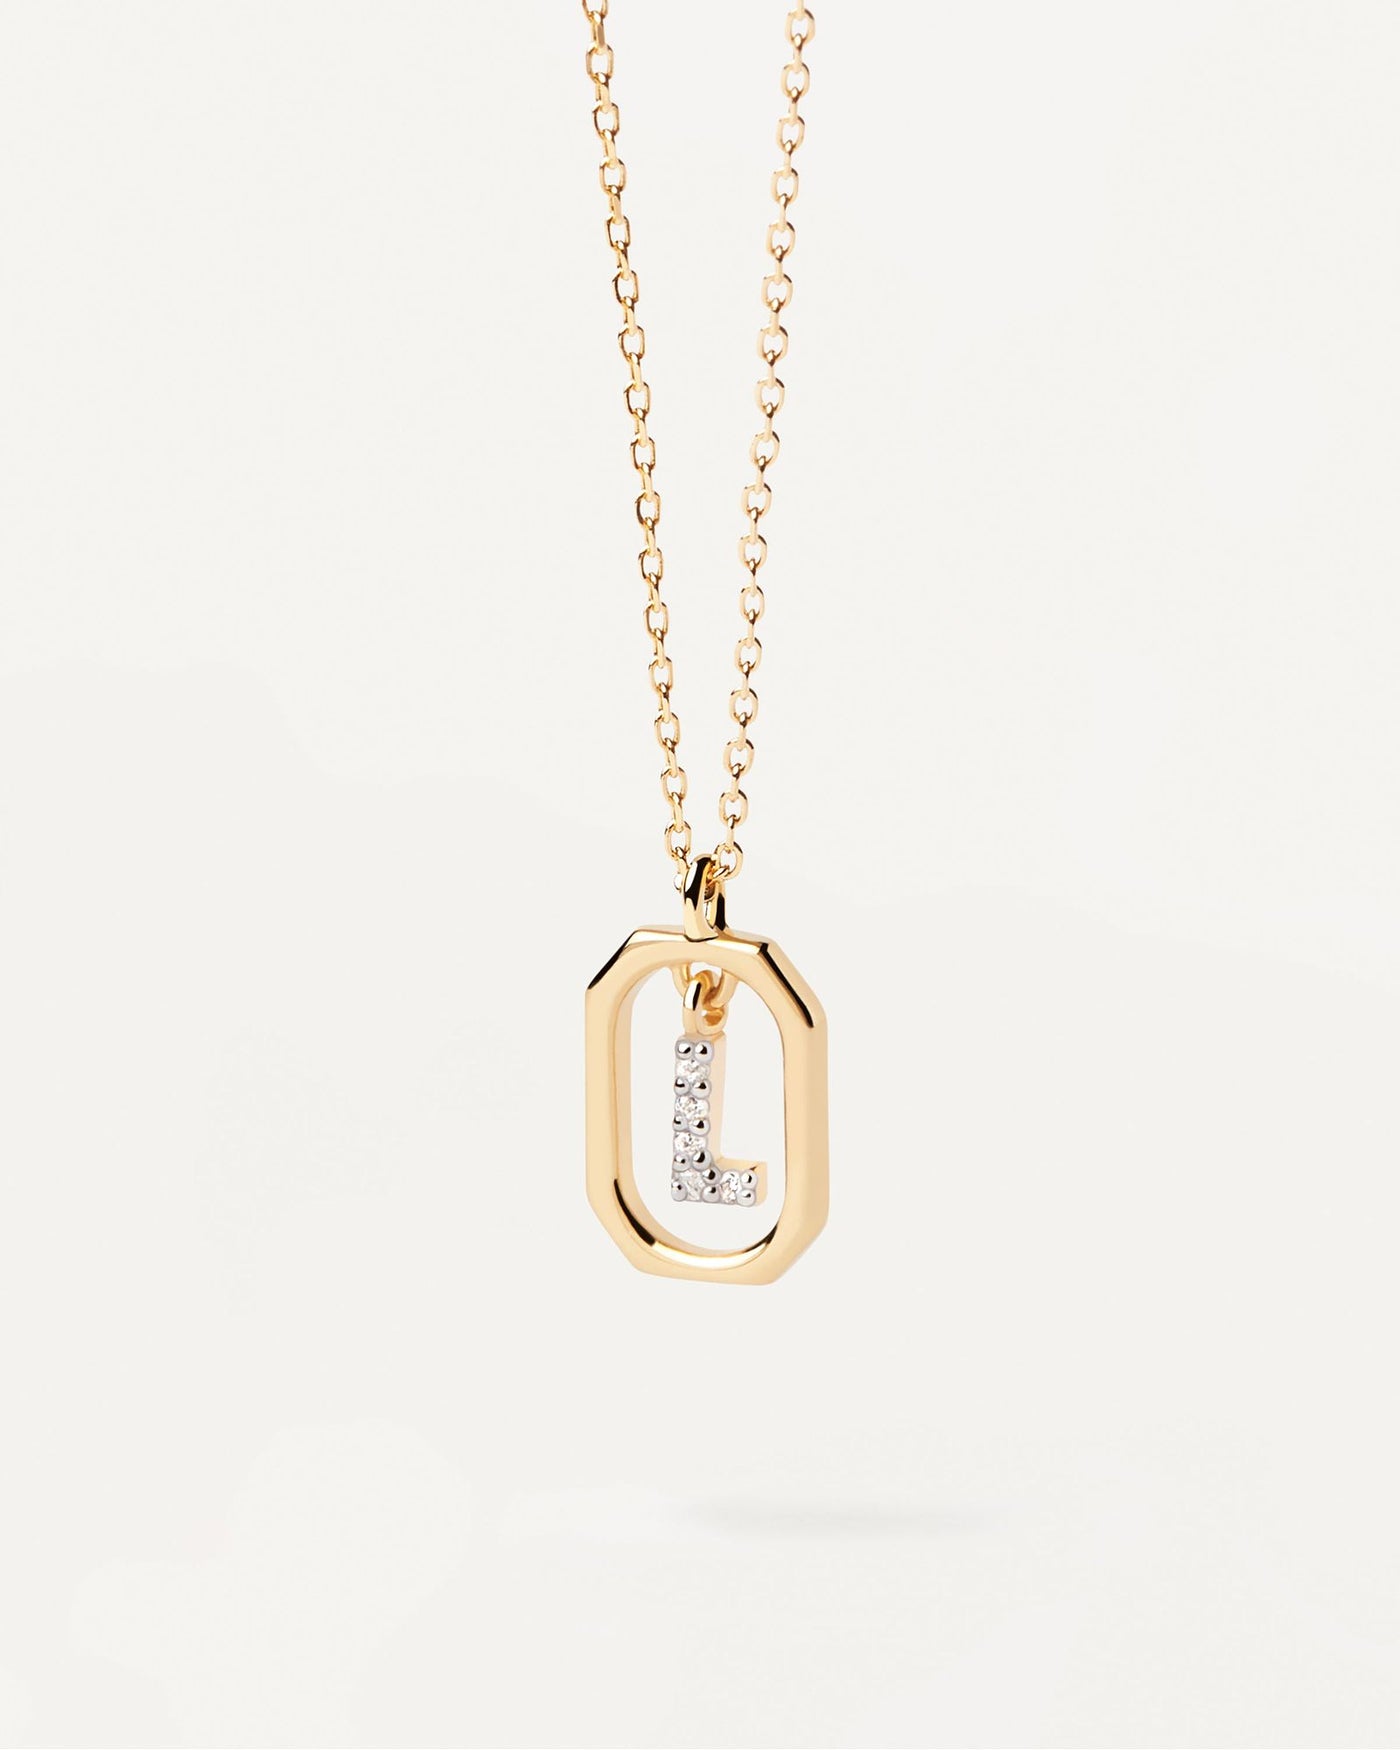 2024 Selection | Mini Letter L Necklace. Small initial L necklace in zirconia inside gold-plated silver octagonal pendant. Get the latest arrival from PDPAOLA. Place your order safely and get this Best Seller. Free Shipping.